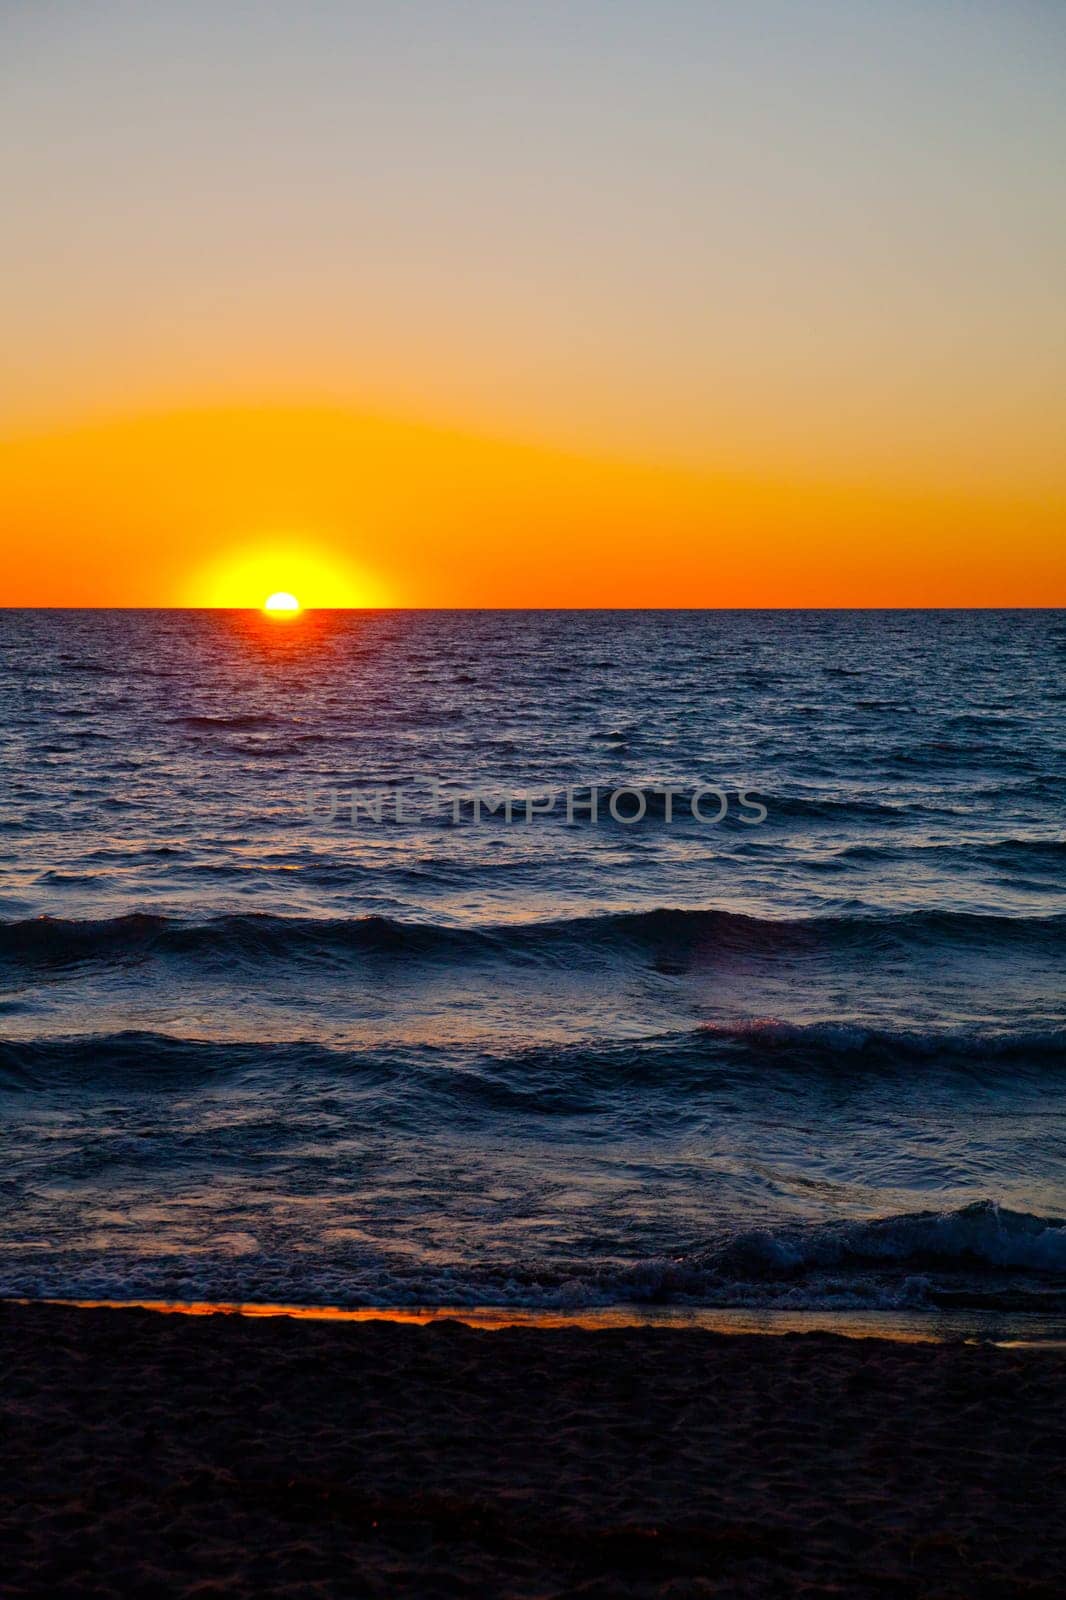 Tranquil Sunset Over Lake Michigan Shoreline by njproductions